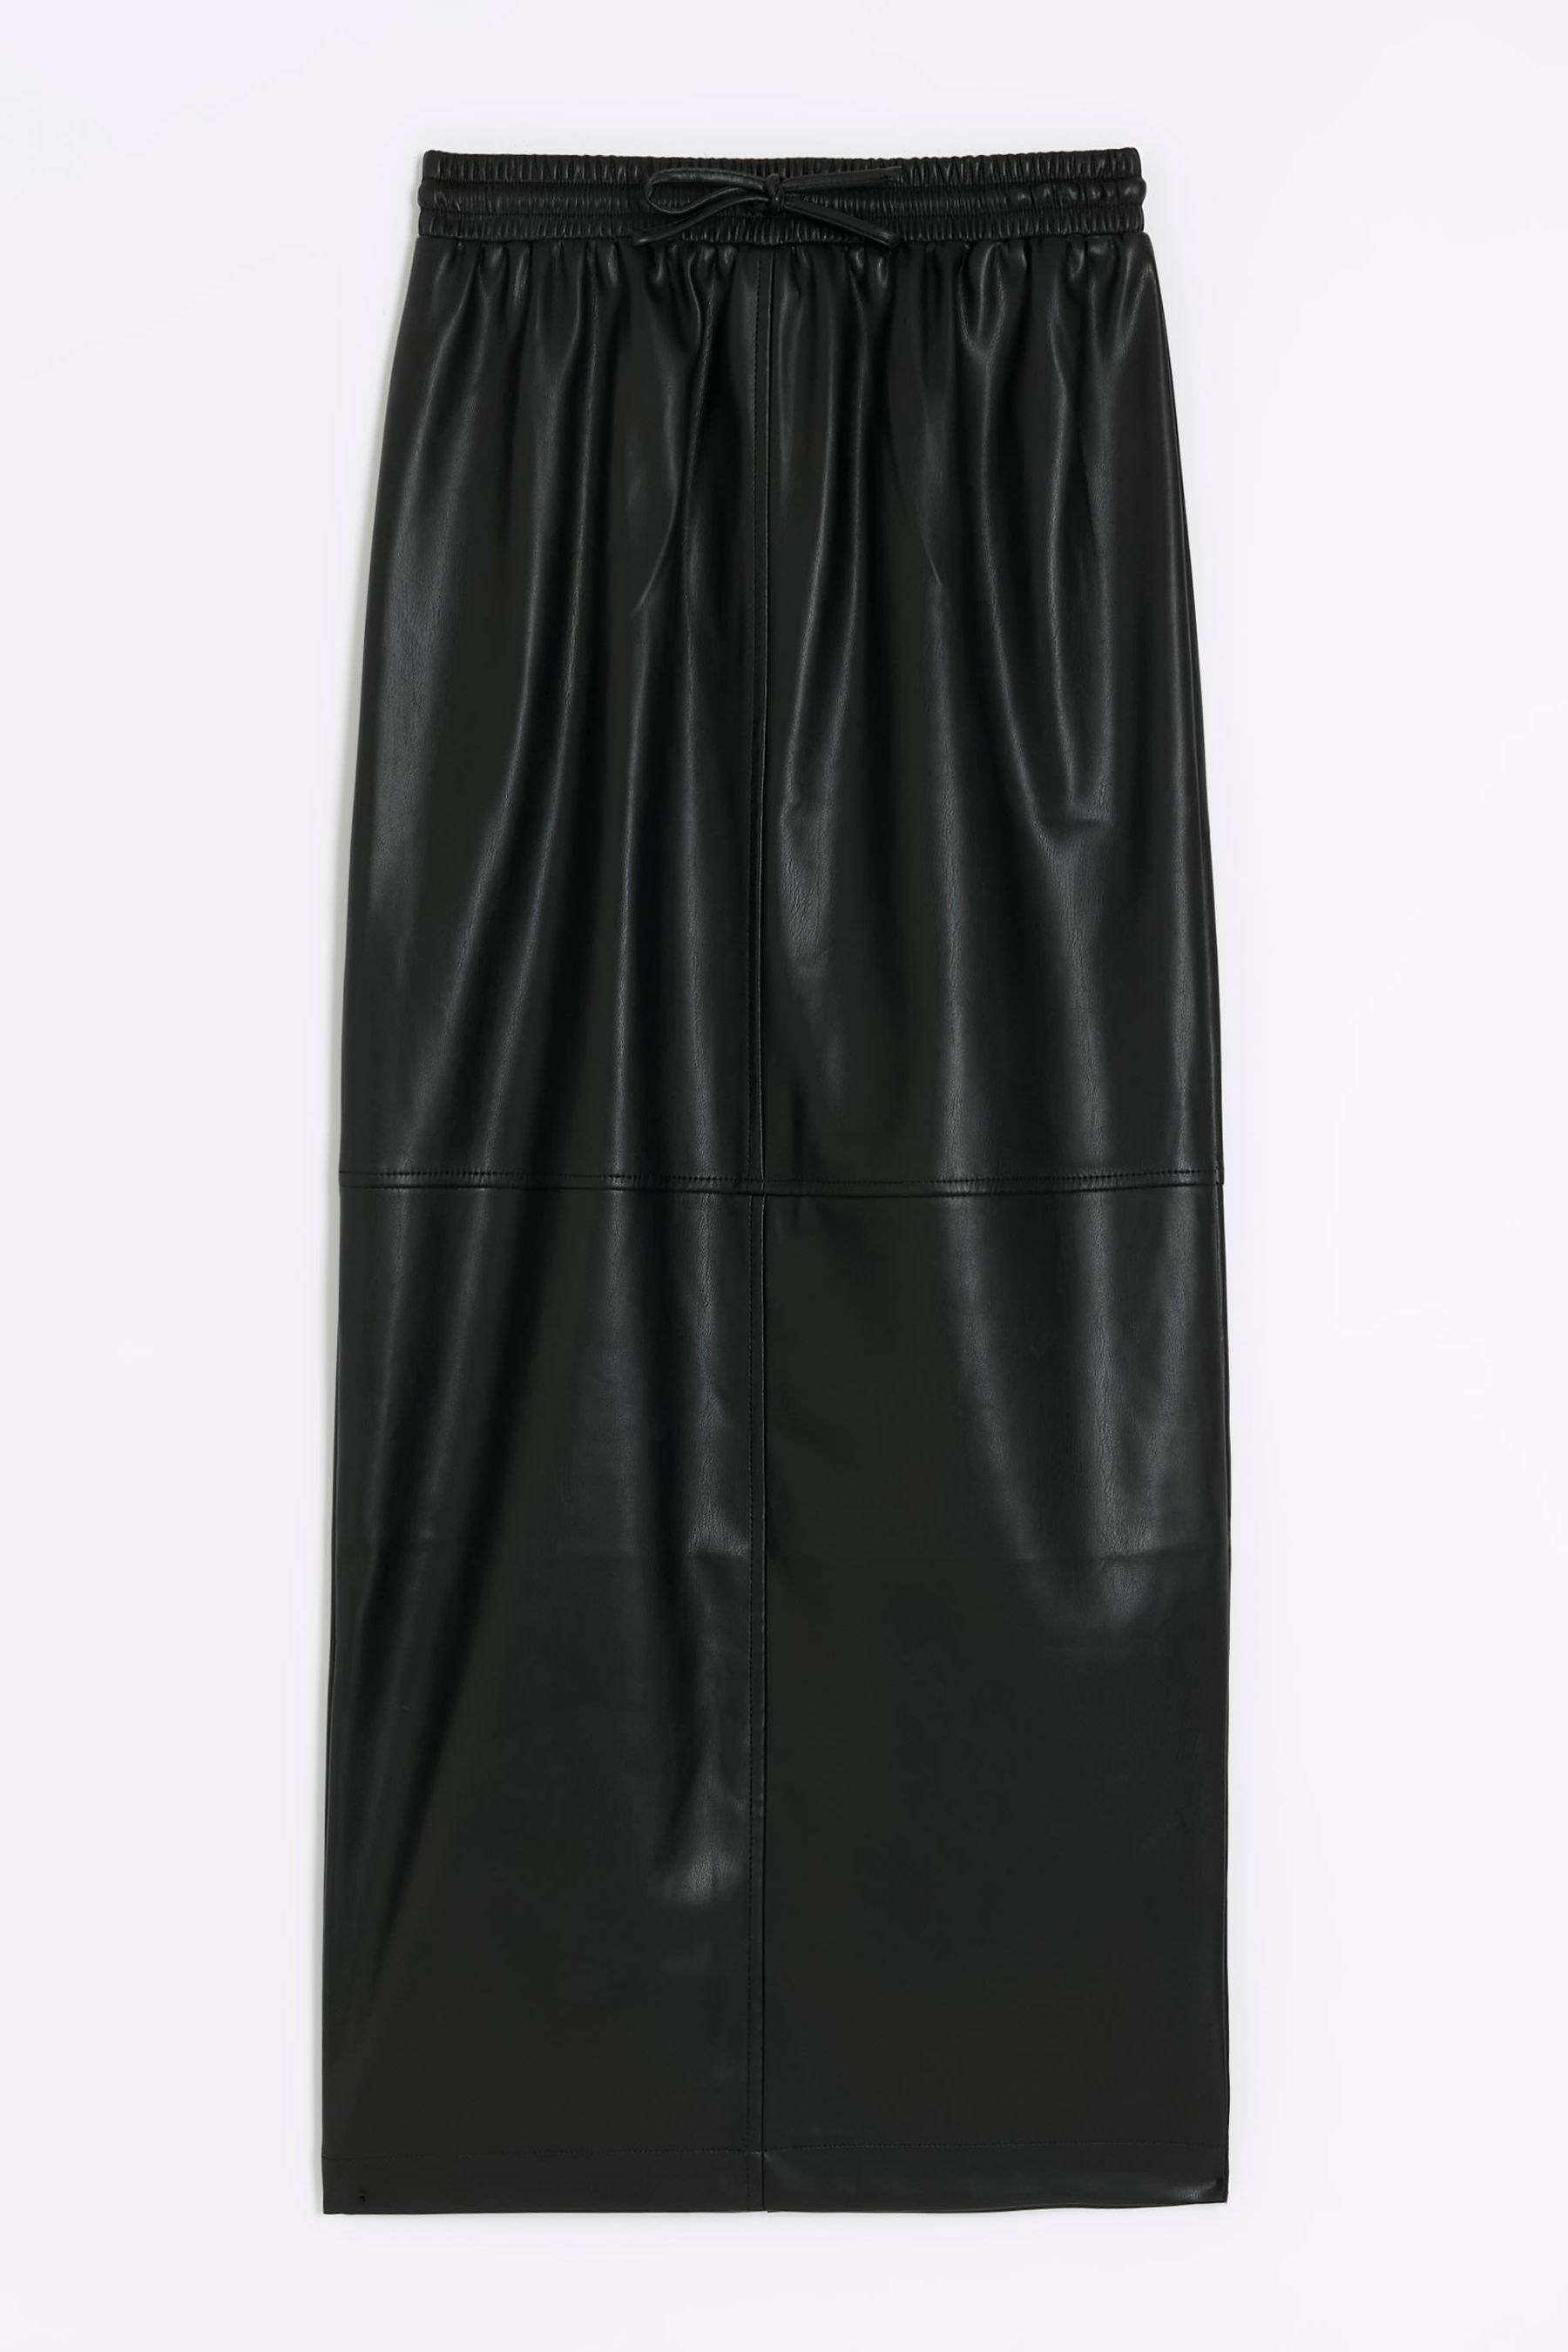 Buy River Island Black Faux Leather Elasticated Maxi Skirt from the ...